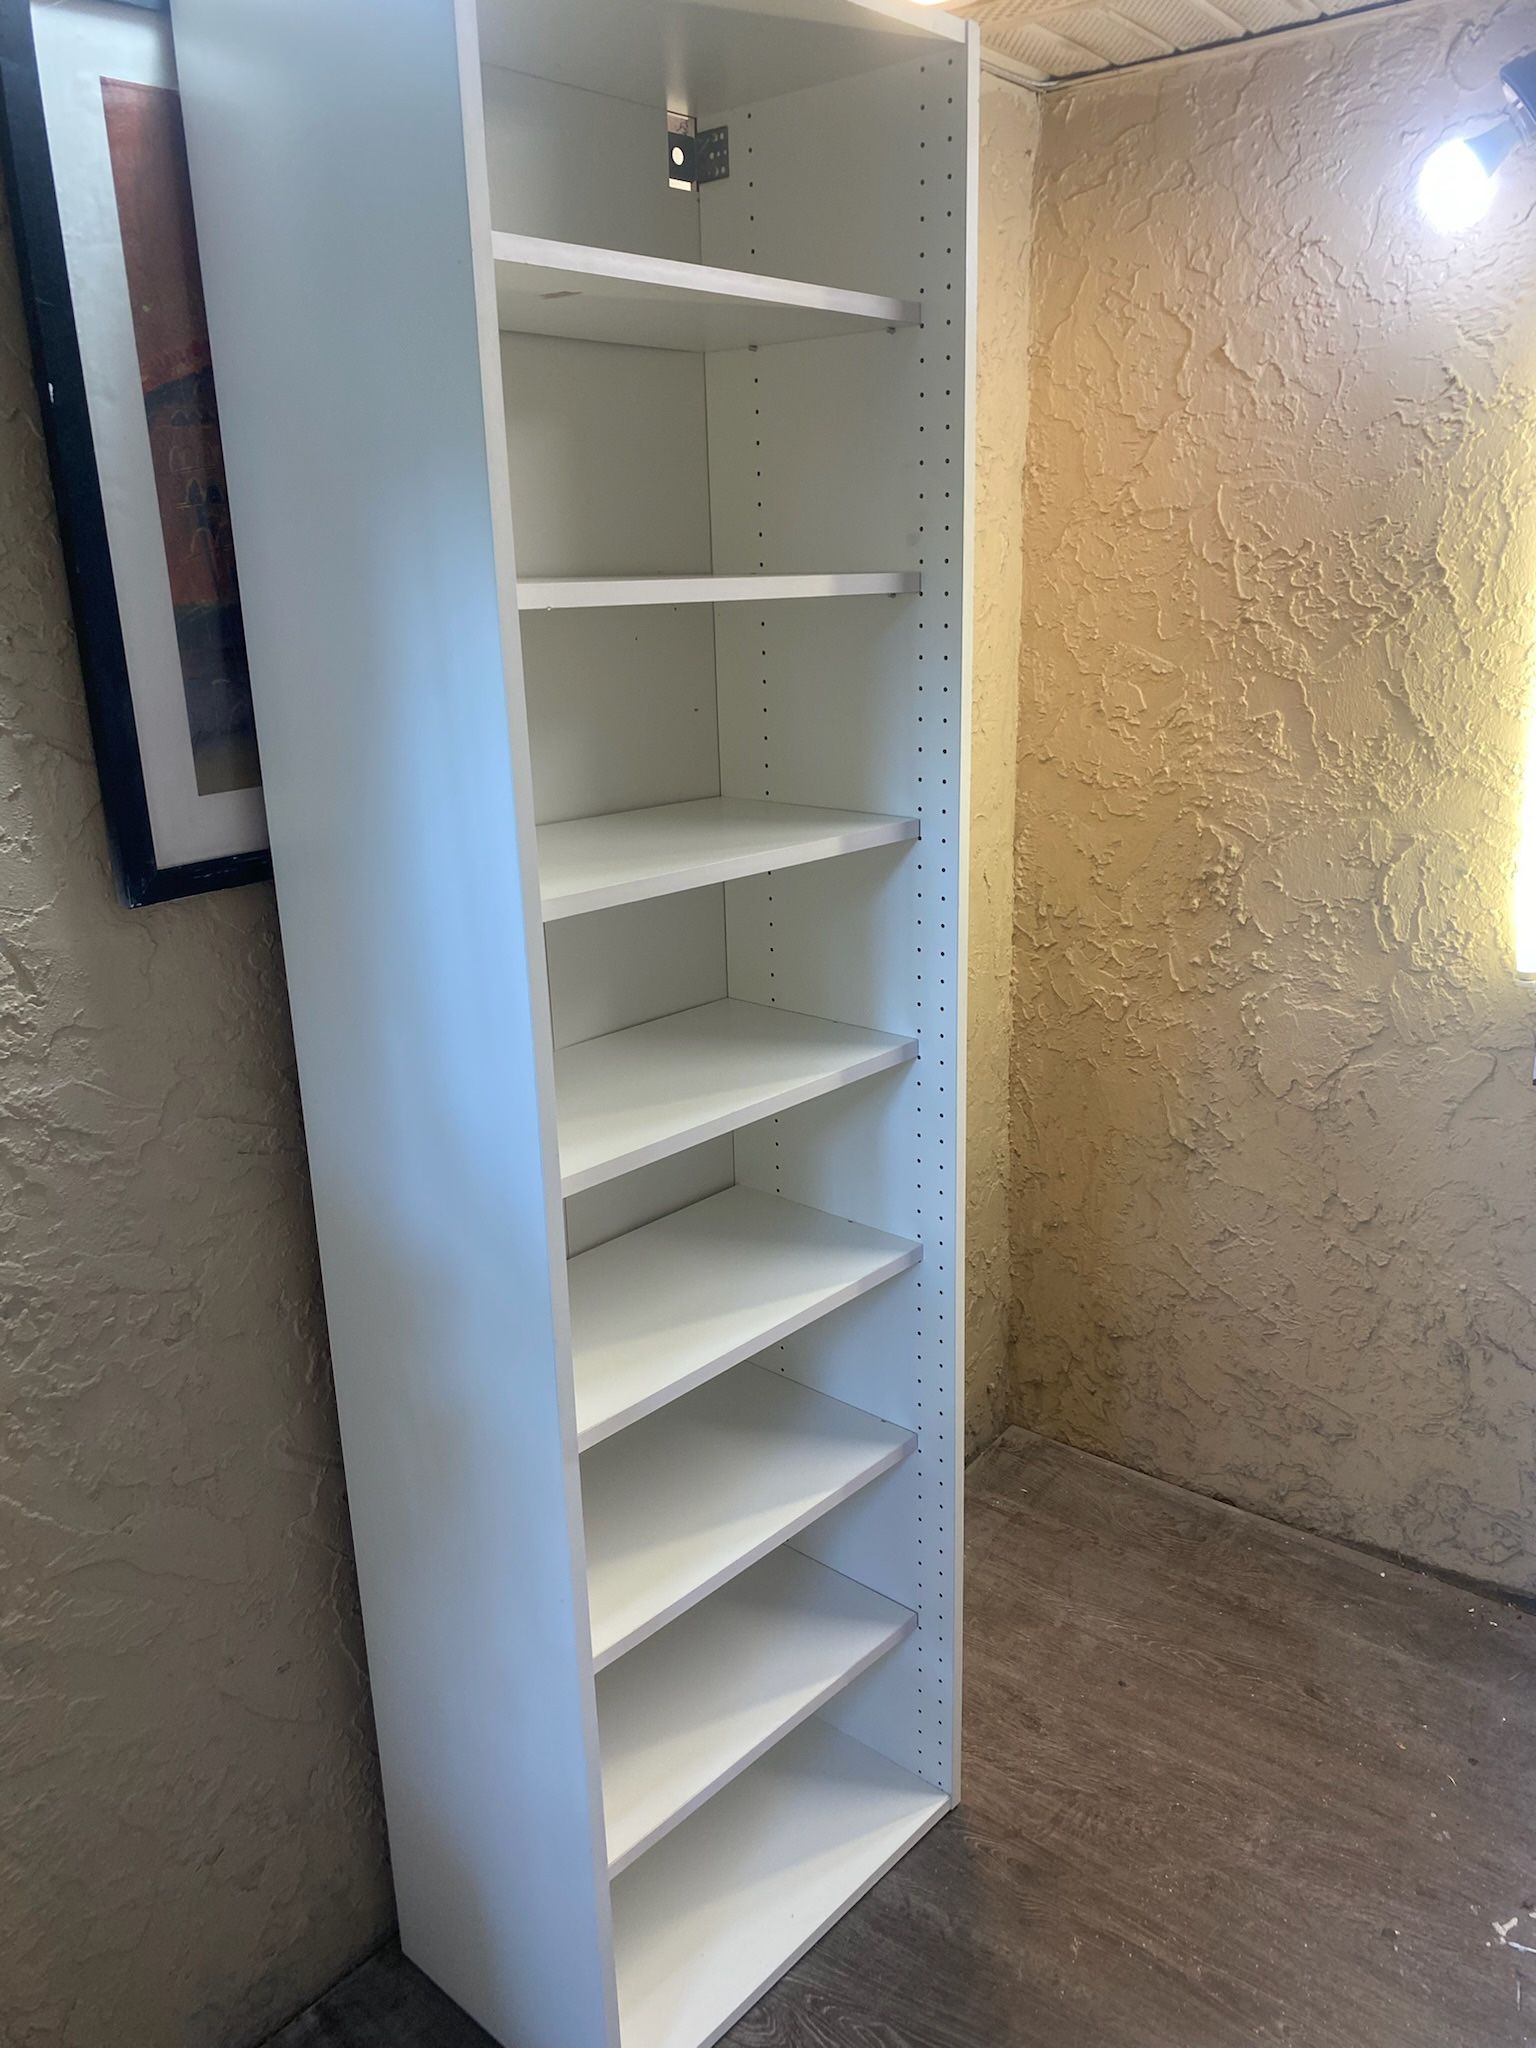 TALL WHITE Bookcase with Adjustable Shelves 6.5 Feet Tall - Local Delivery for a Fee - See My Items